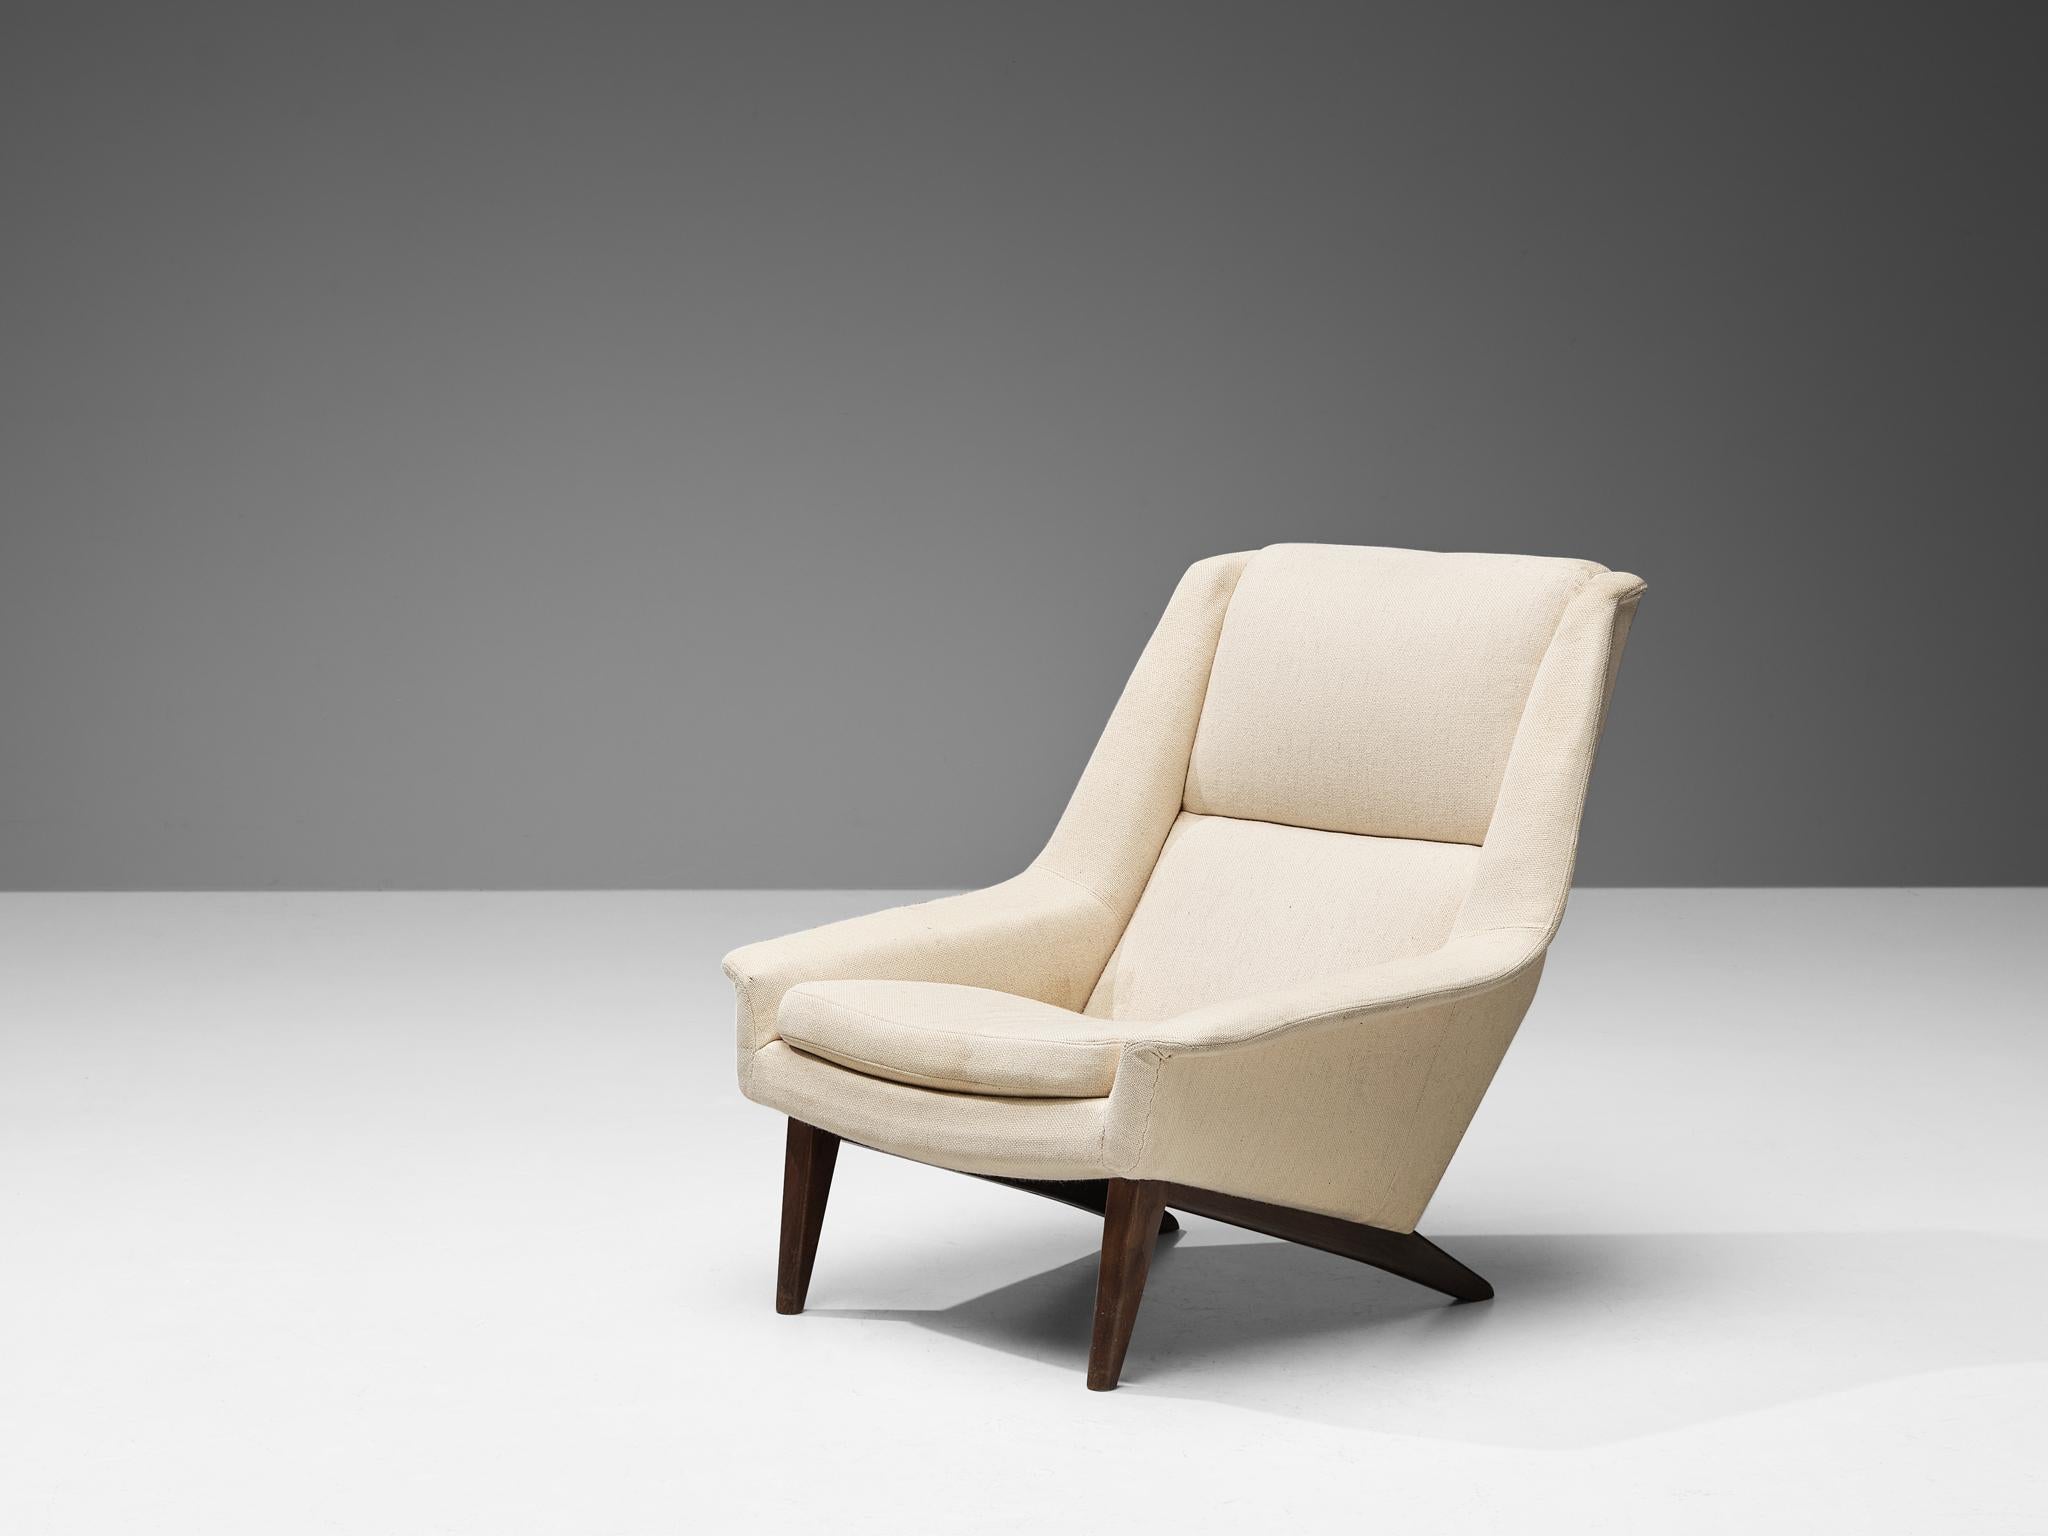 Folke Ohlsson for Fritz Hansen, lounge chair, model '4410', fabric, teak, Denmark, design in 1957

Armchair by Folke Ohlsson made in Denmark in the 1950s. This high quality lounge chair is characterized by a stylish timeless design based on elegant